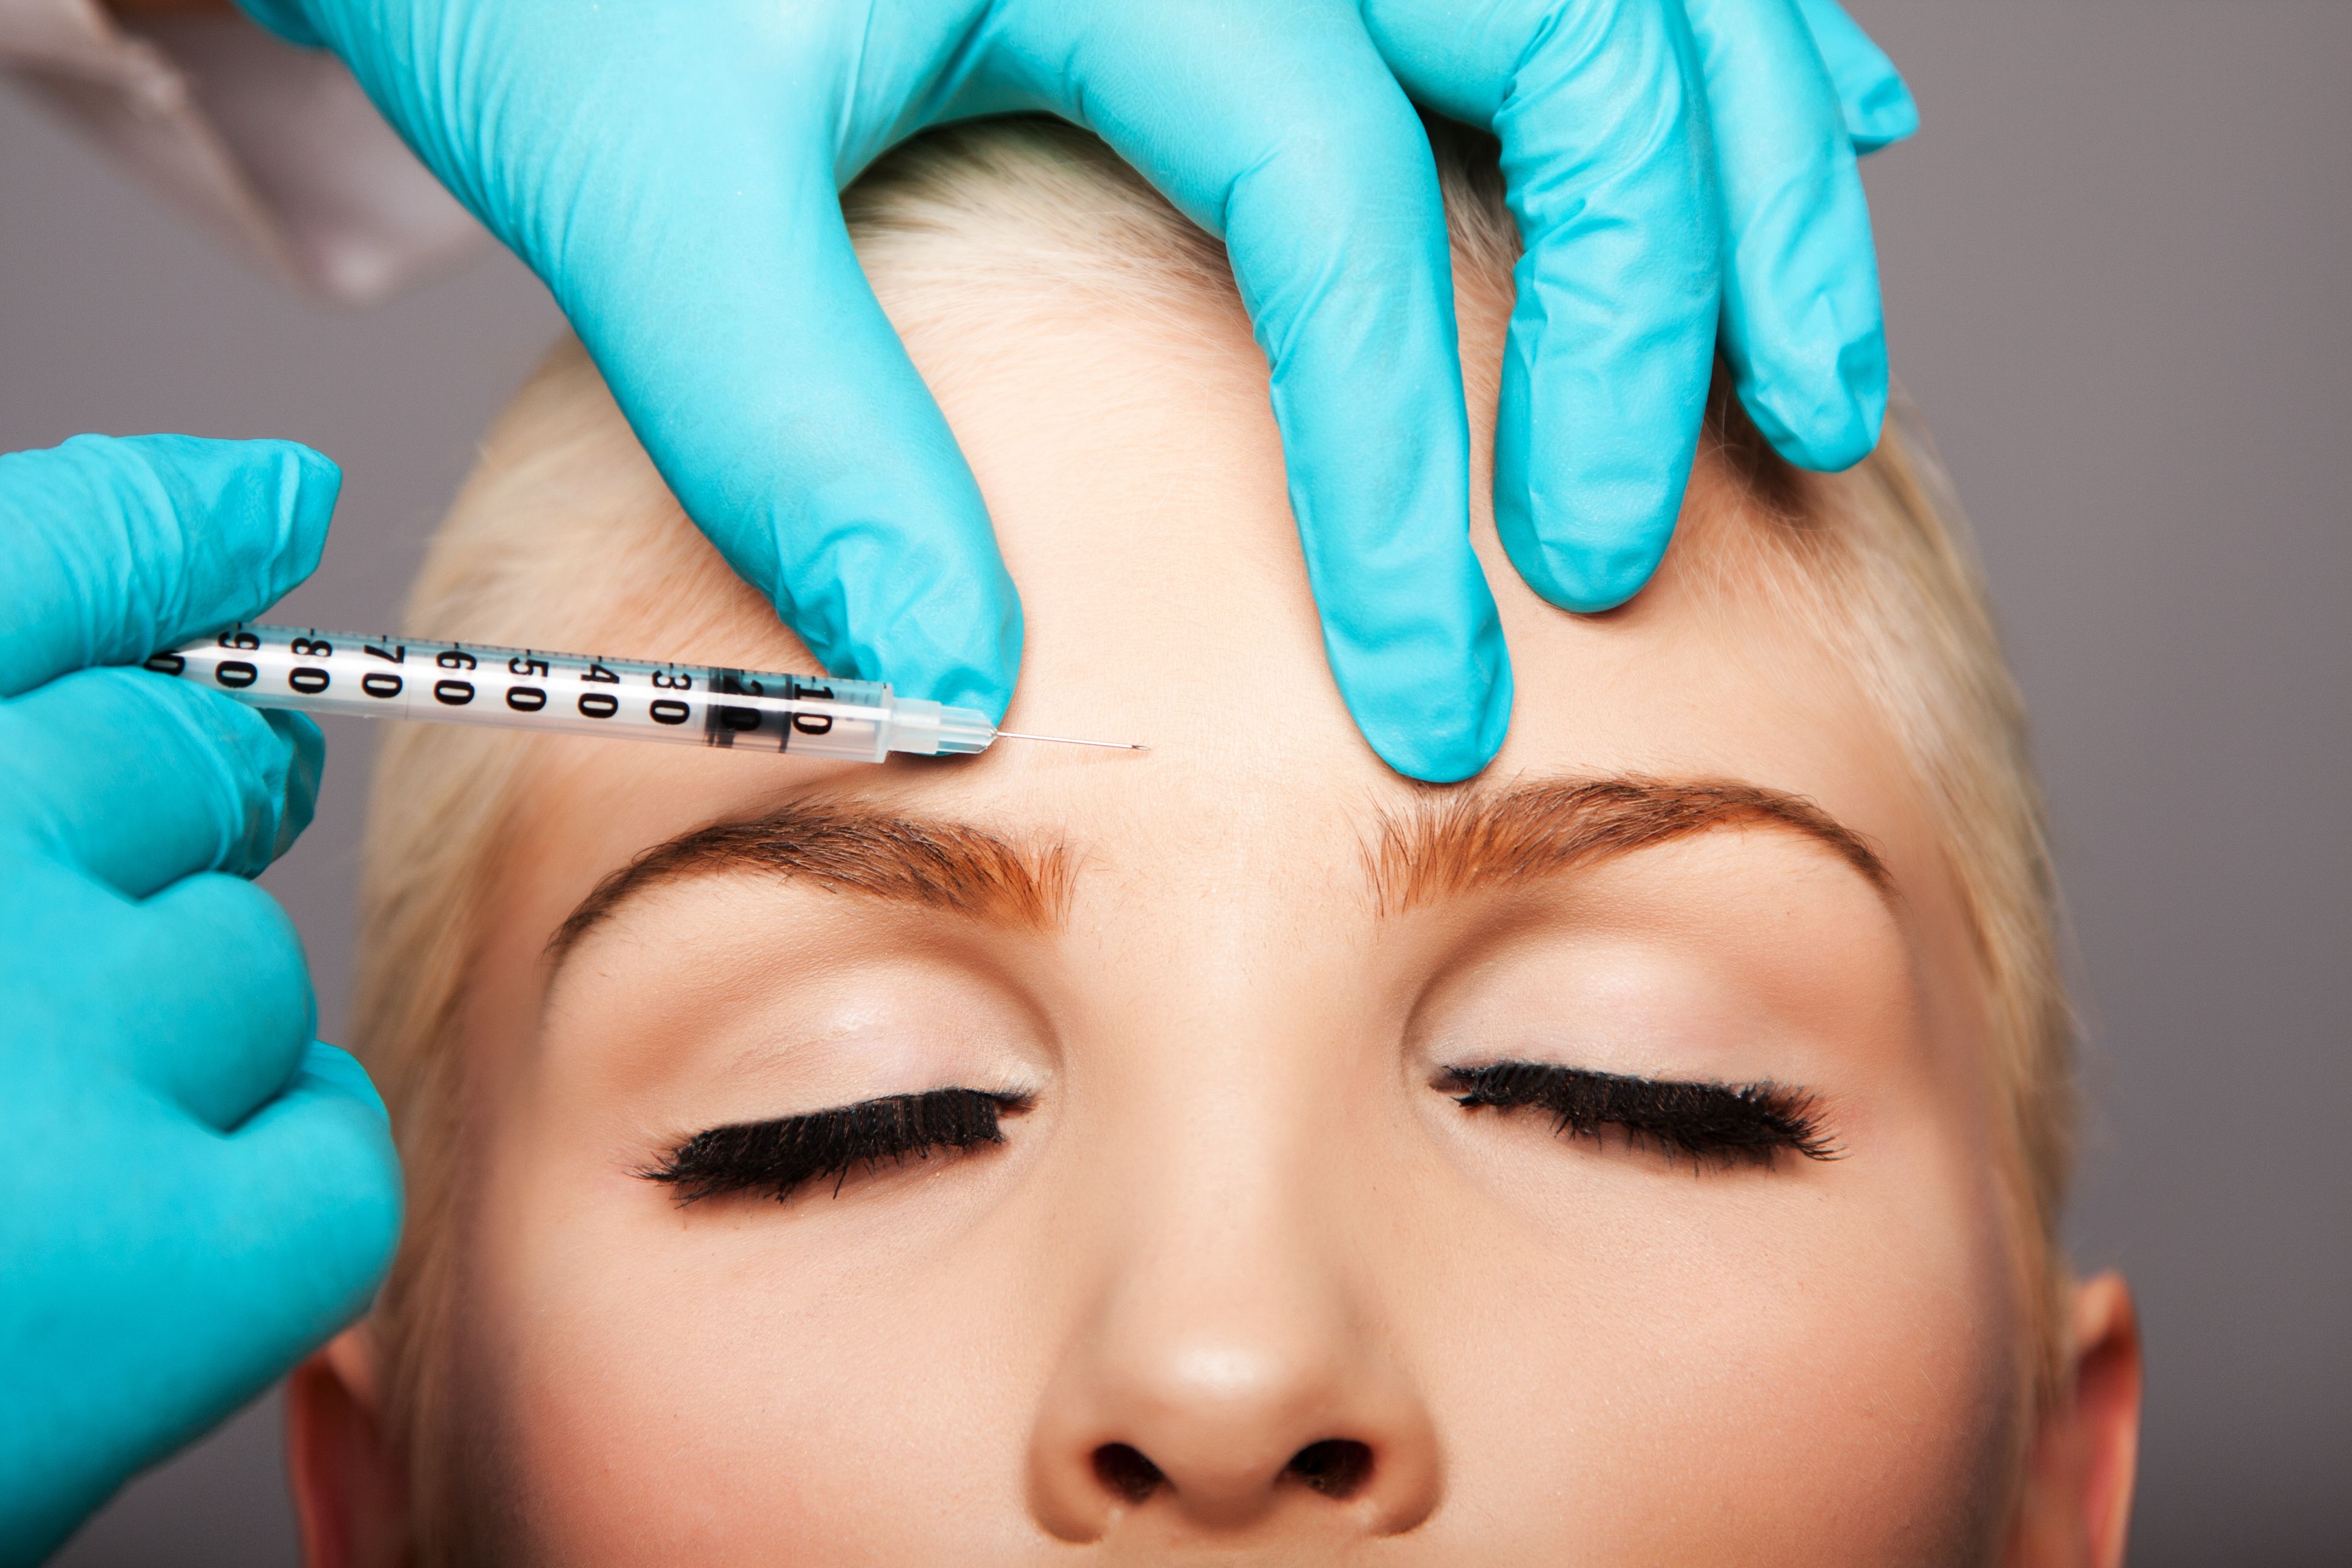 Questions To Ask Yourself Before Getting A Botox Injection